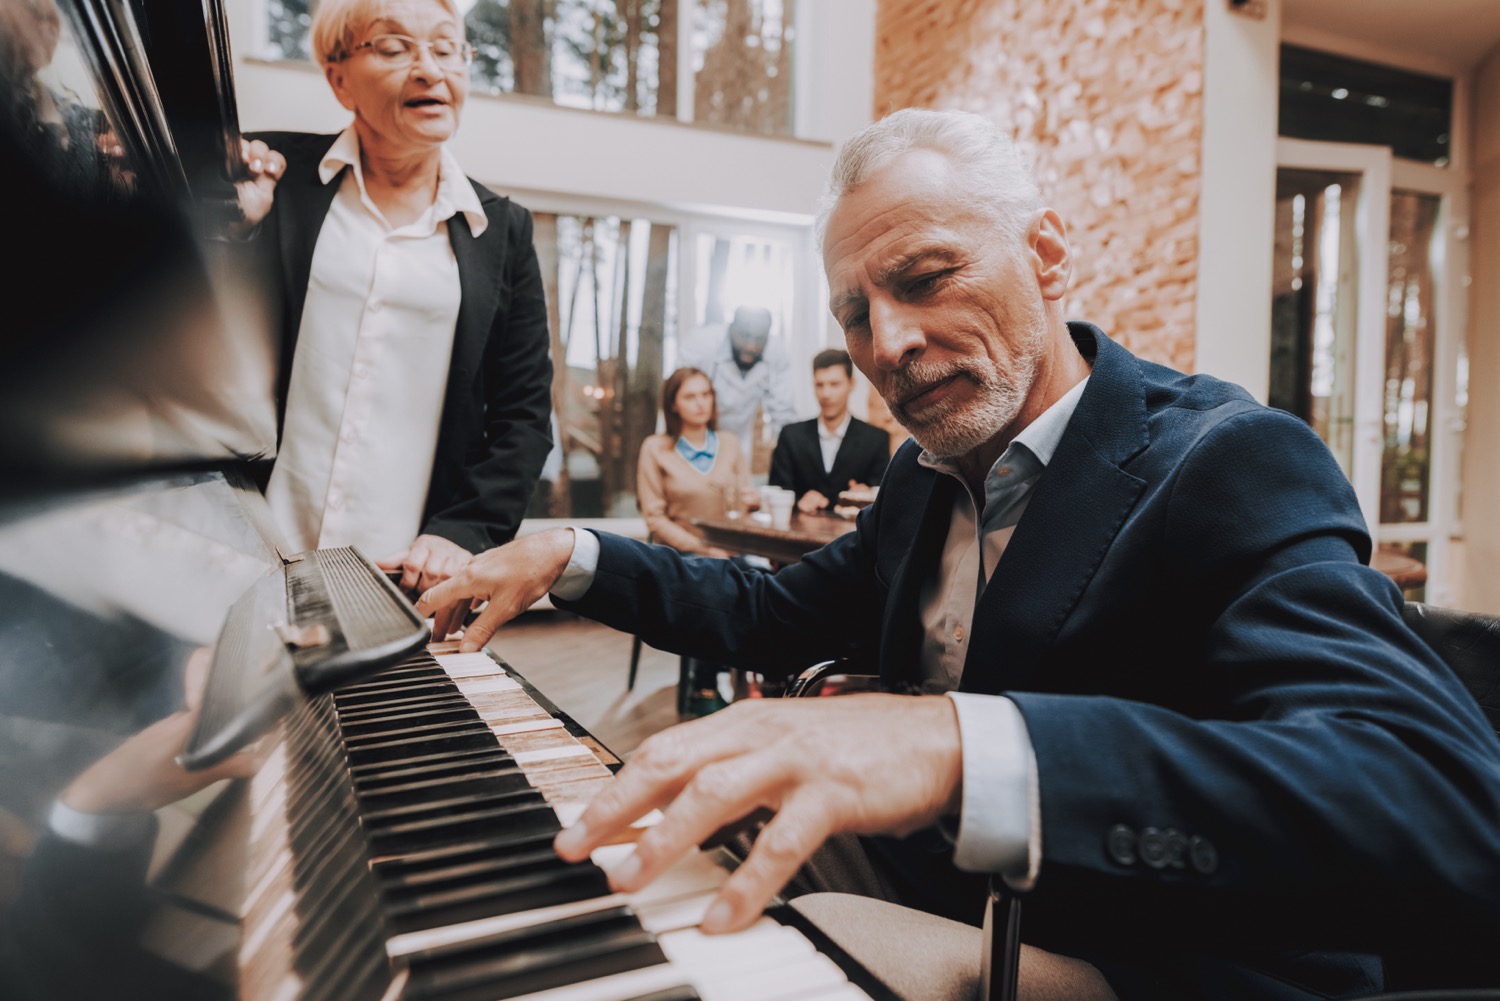 As part of his music therapy and Alzheimer’s care plan, an older gentleman plays the piano regularly for his fellow nursing home residents.